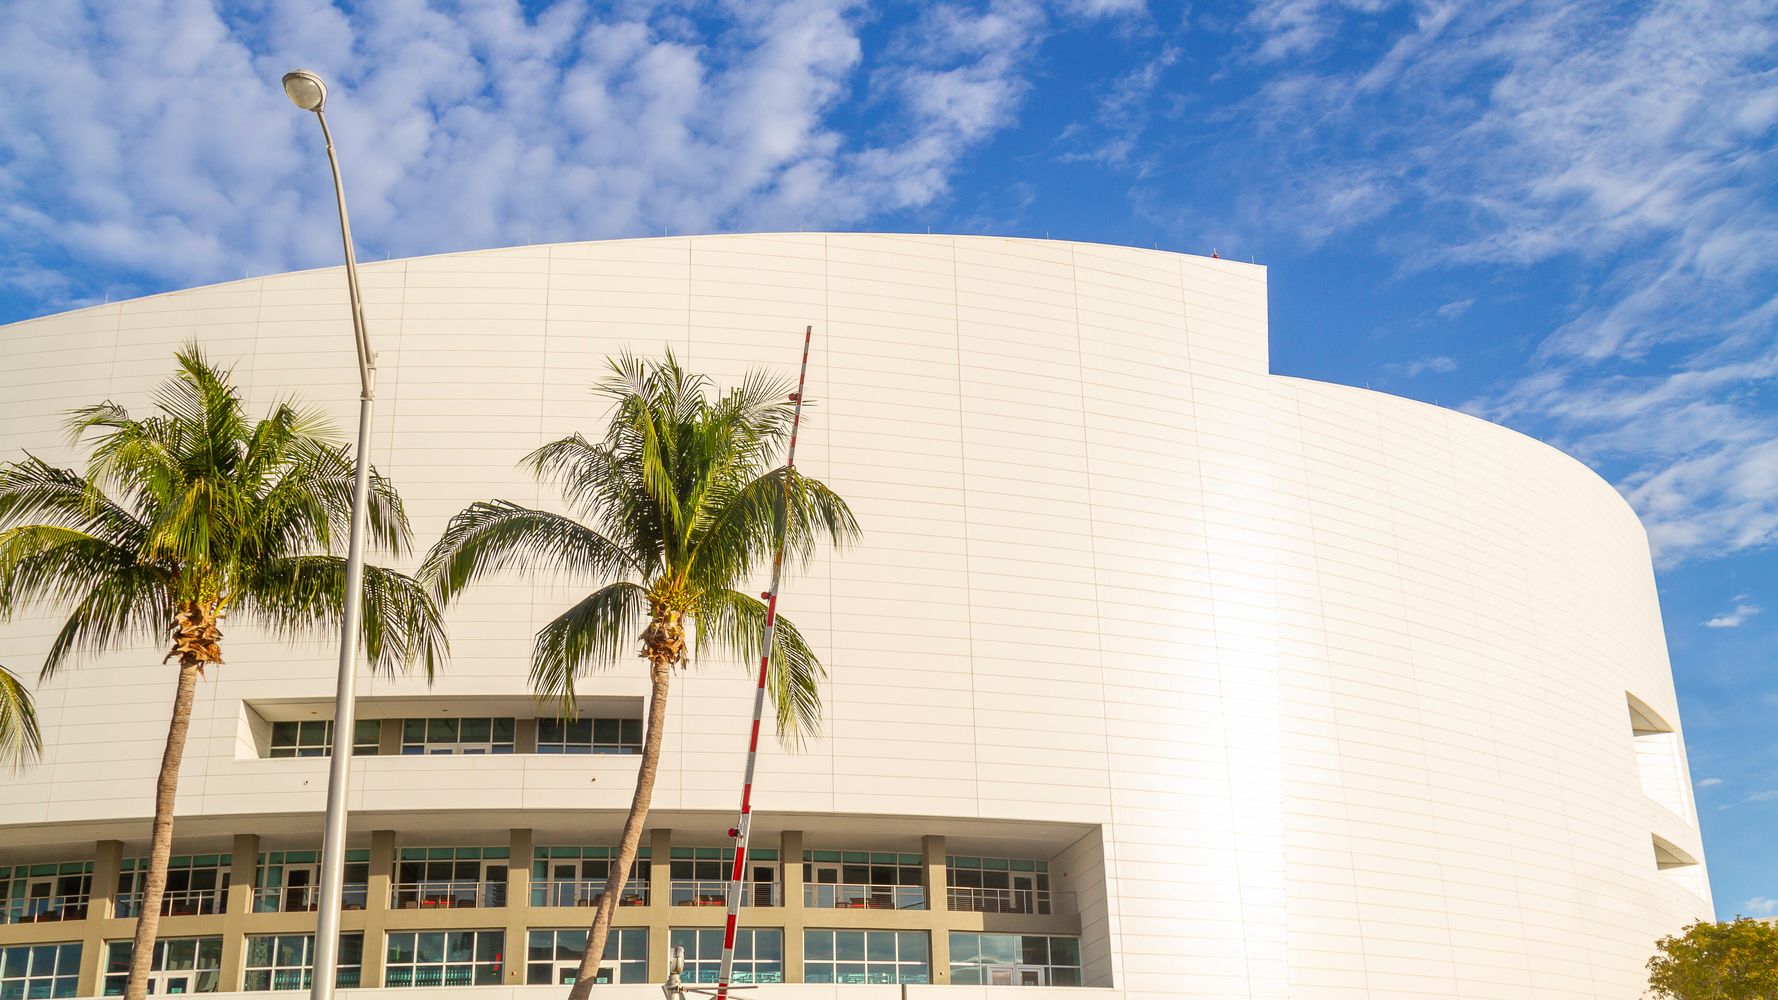 Miami Heat's home arena will get new name following FTX collapse